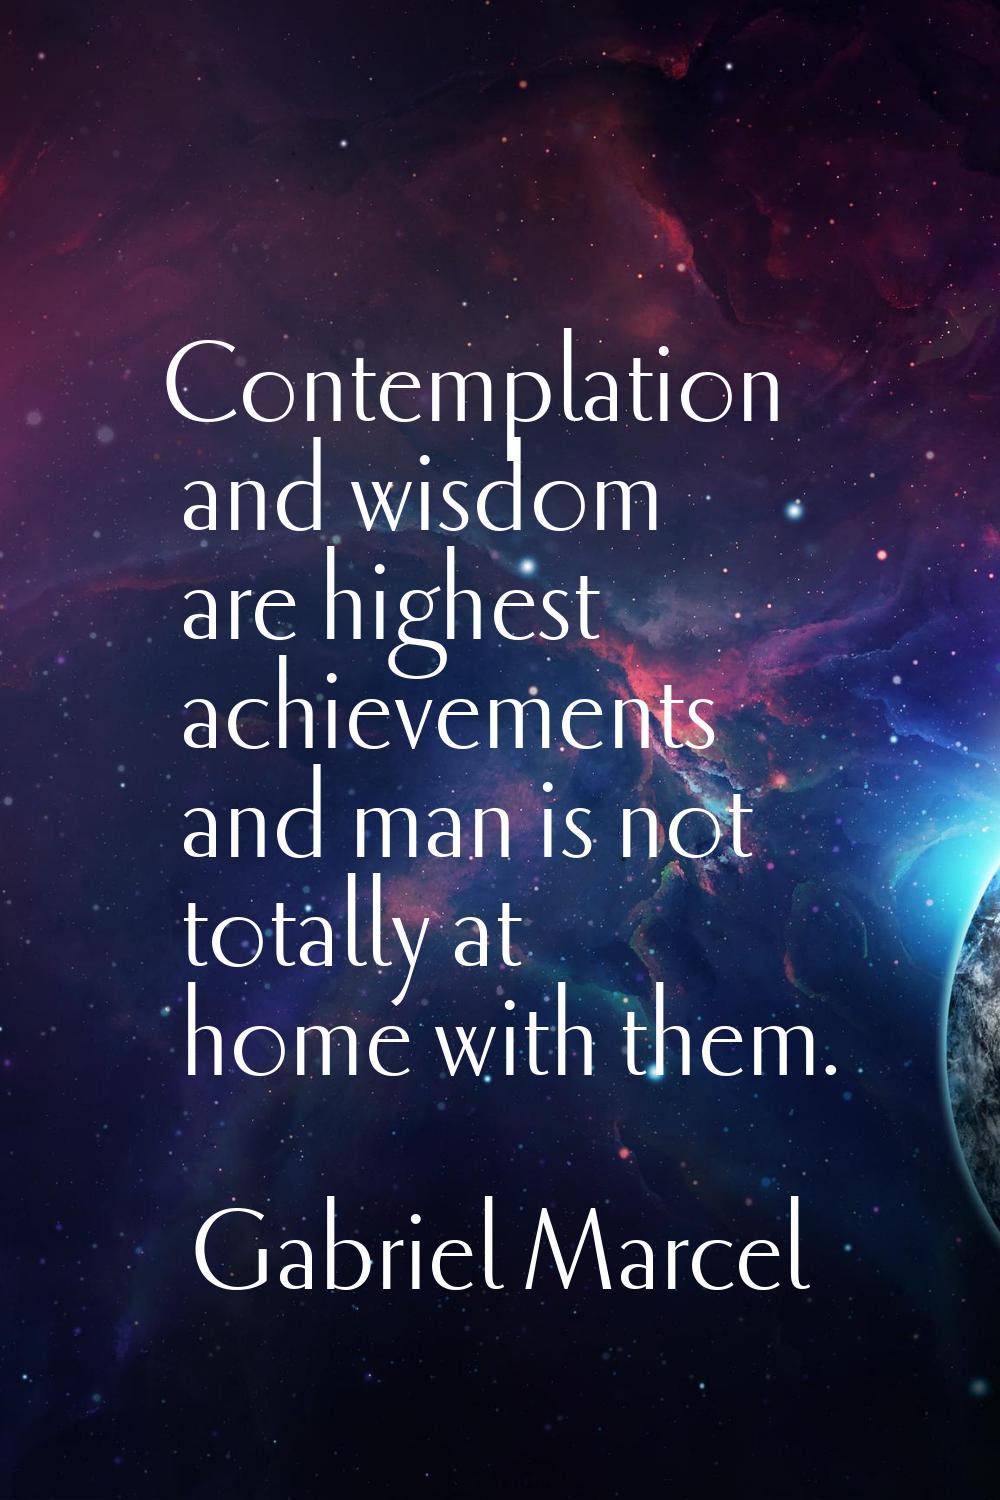 Contemplation and wisdom are highest achievements and man is not totally at home with them.